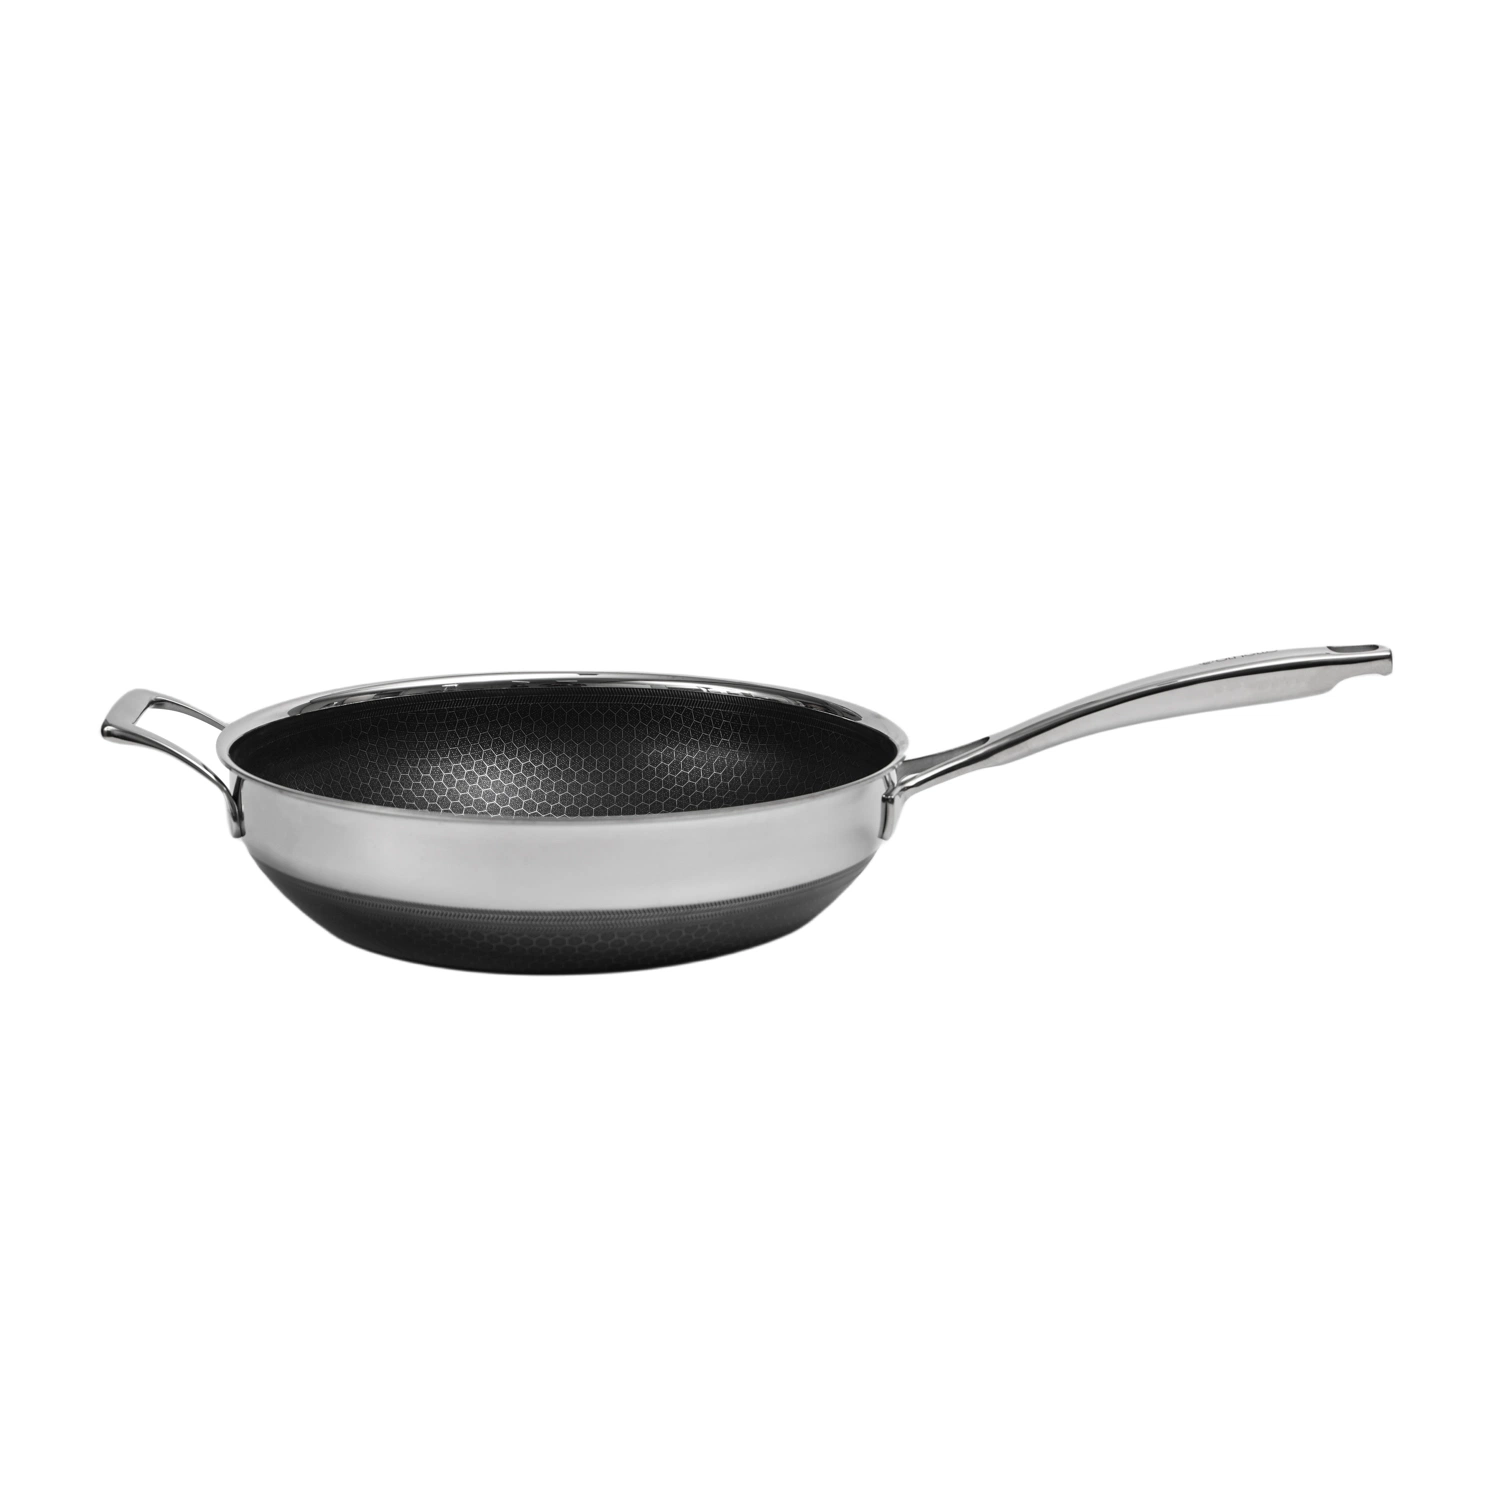 Hot Sales Stainless Steel Cookware Non-Stick Double Layer Honey Comb Coating 30cm Wok